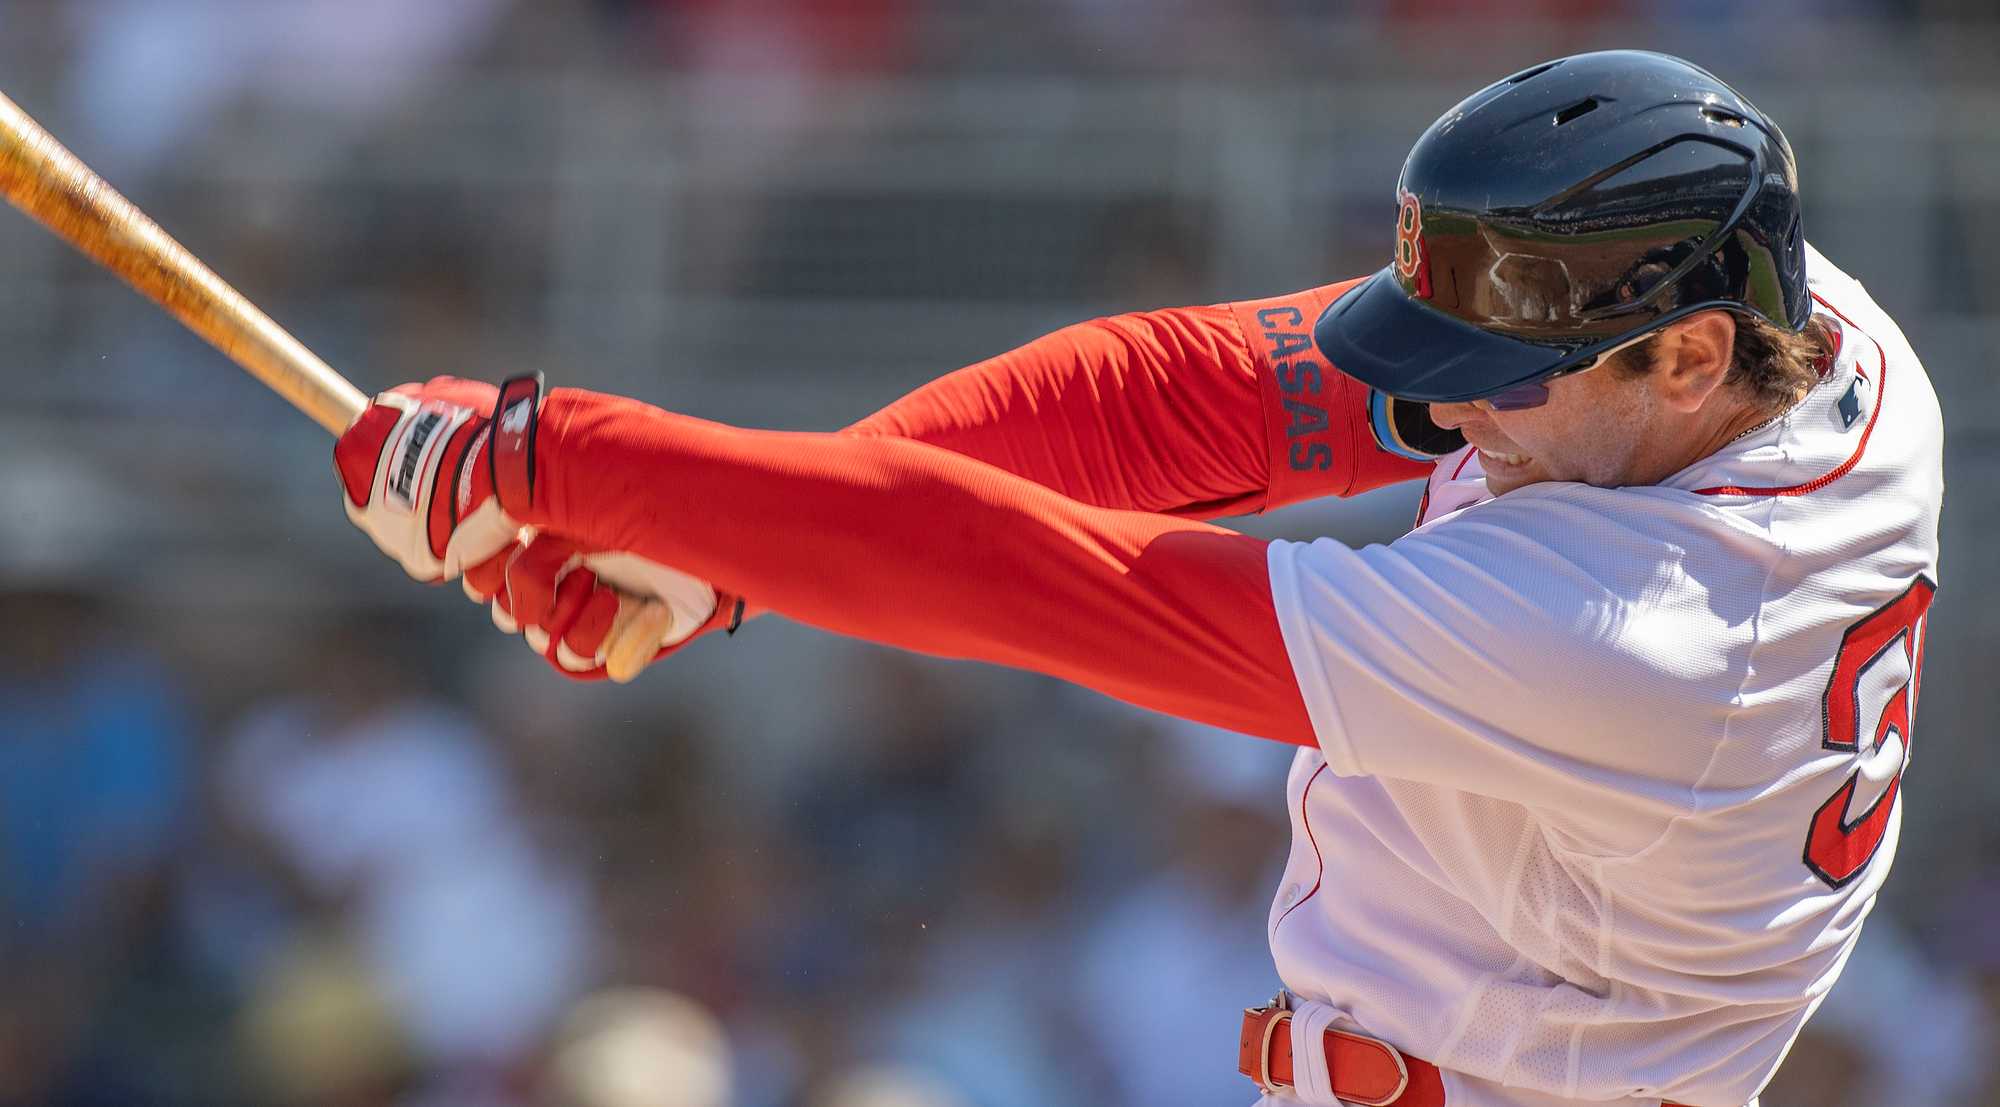 Triston Casas was drafted in the first round in 2018. His rapid rise to the majors has allowed the Red Sox more flexibility in how they approach the rest of the roster.